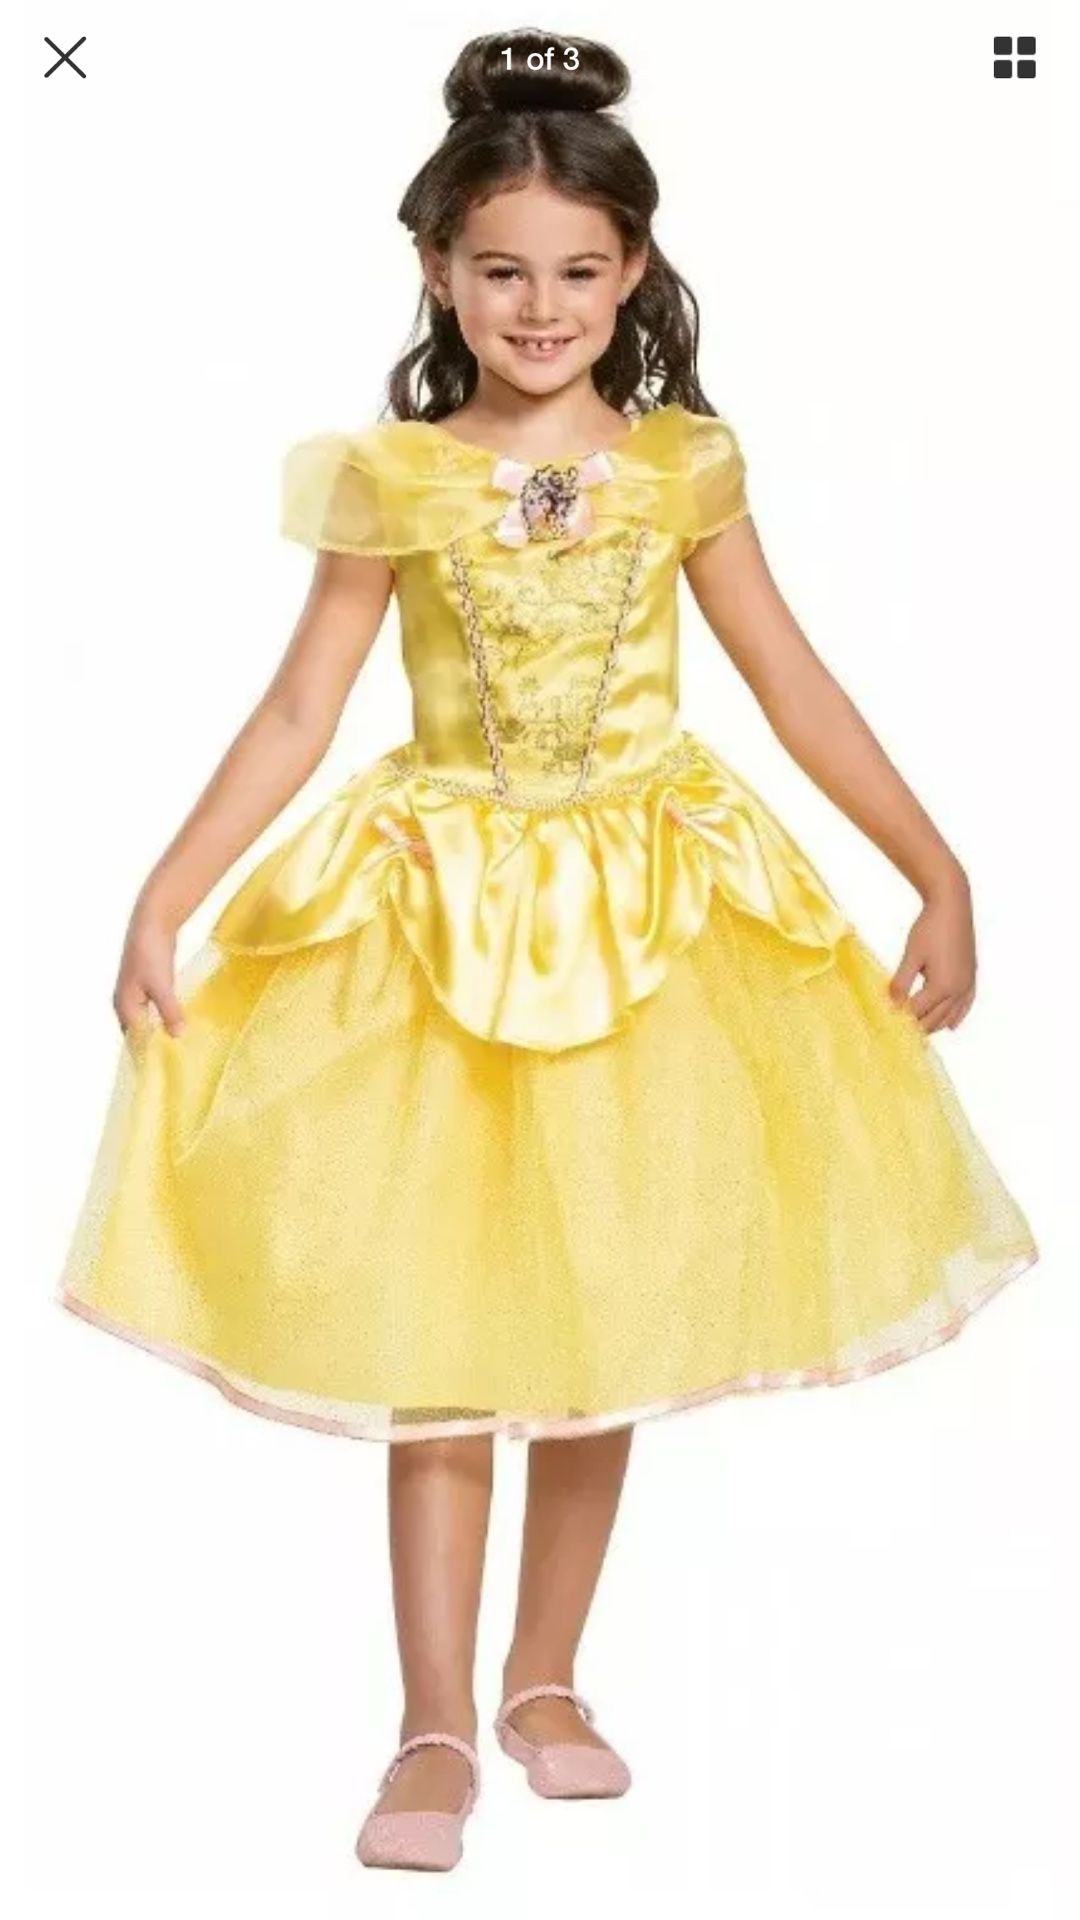 Disney Princess Beauty and the Beast - Belle - Child Costume - M 8-10